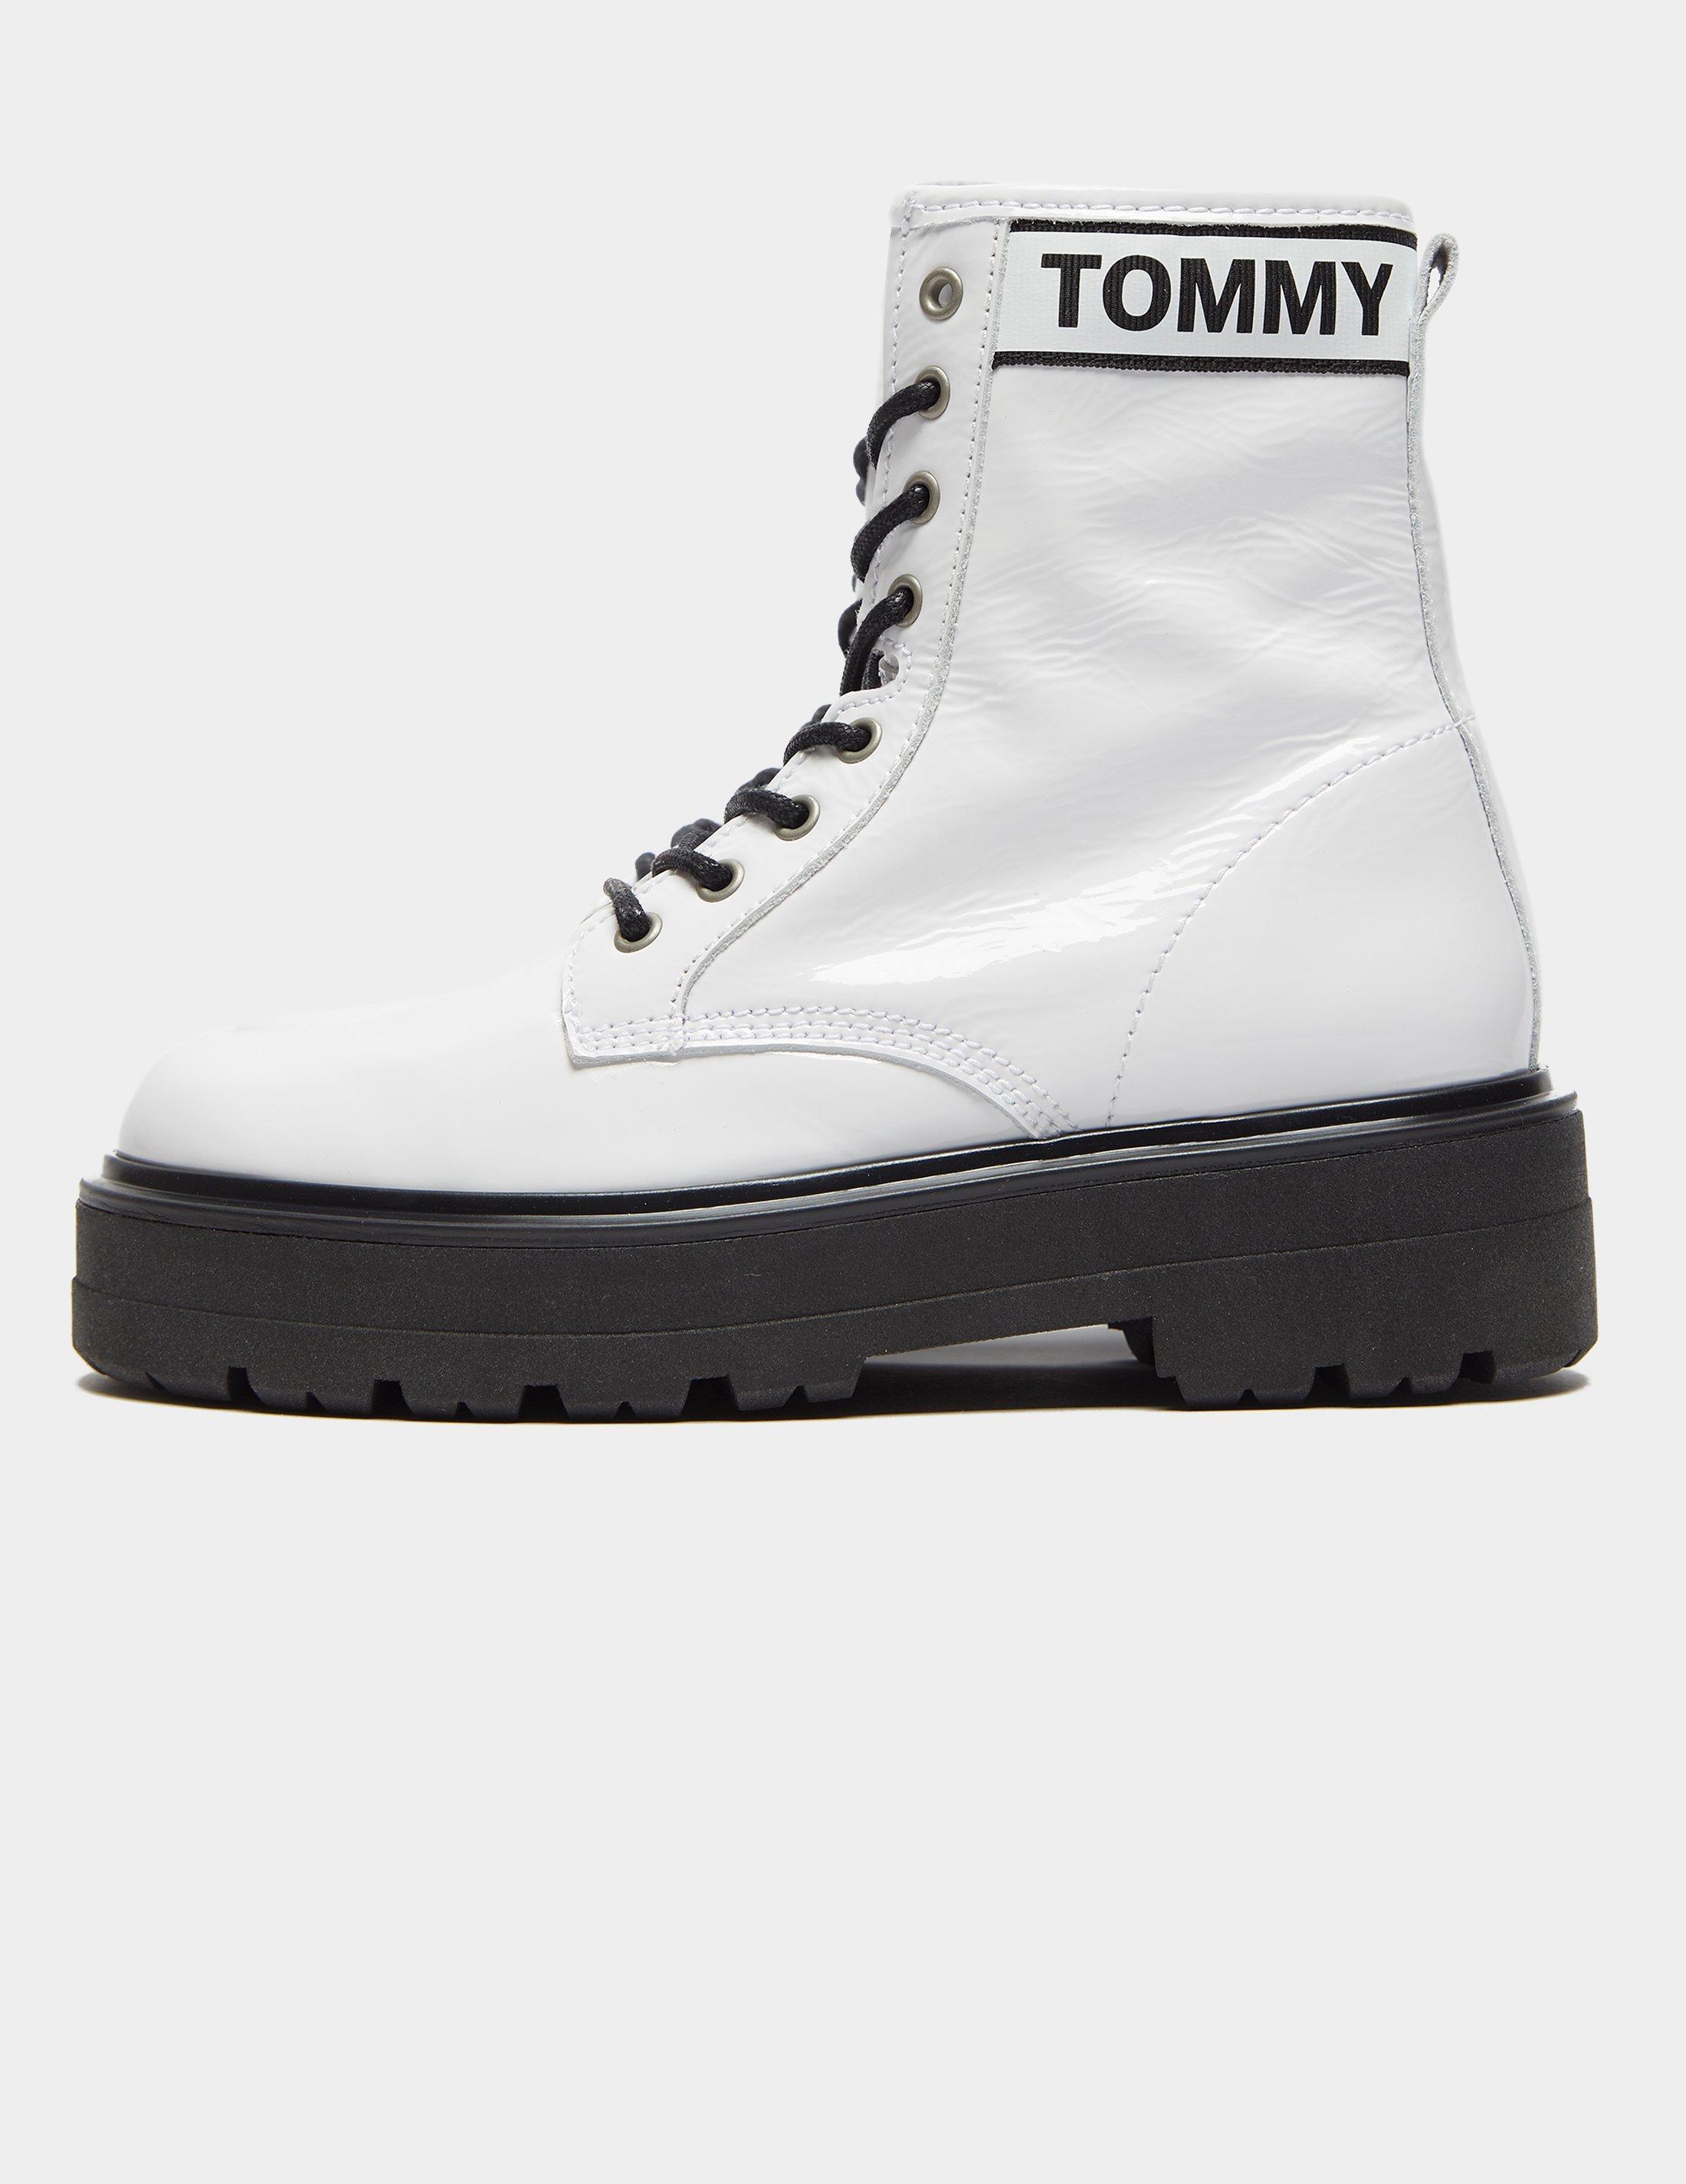 tommy hilfiger military boots